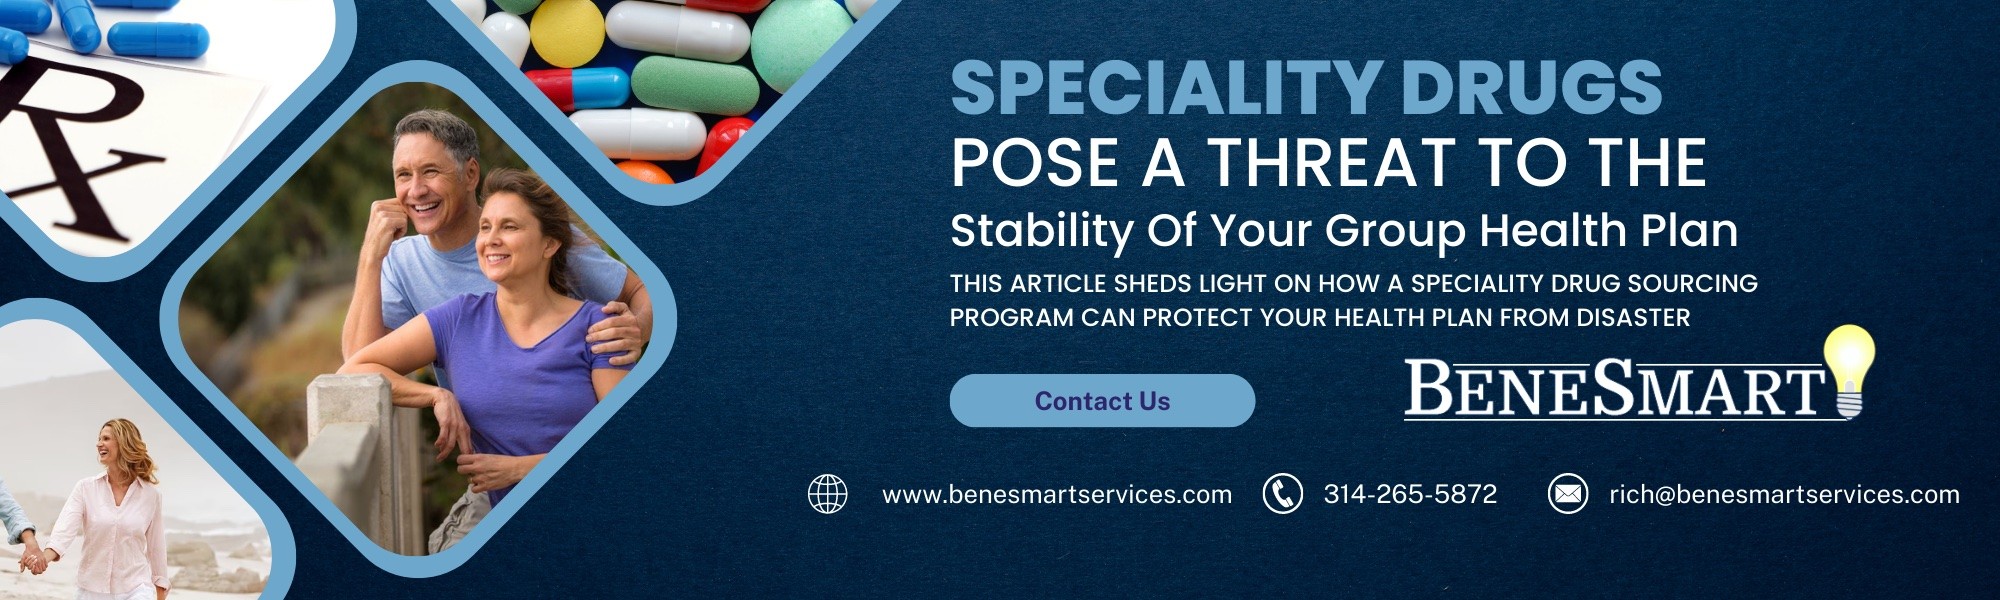 Are speciality drugs posing a threat to the stability of your group health plan?